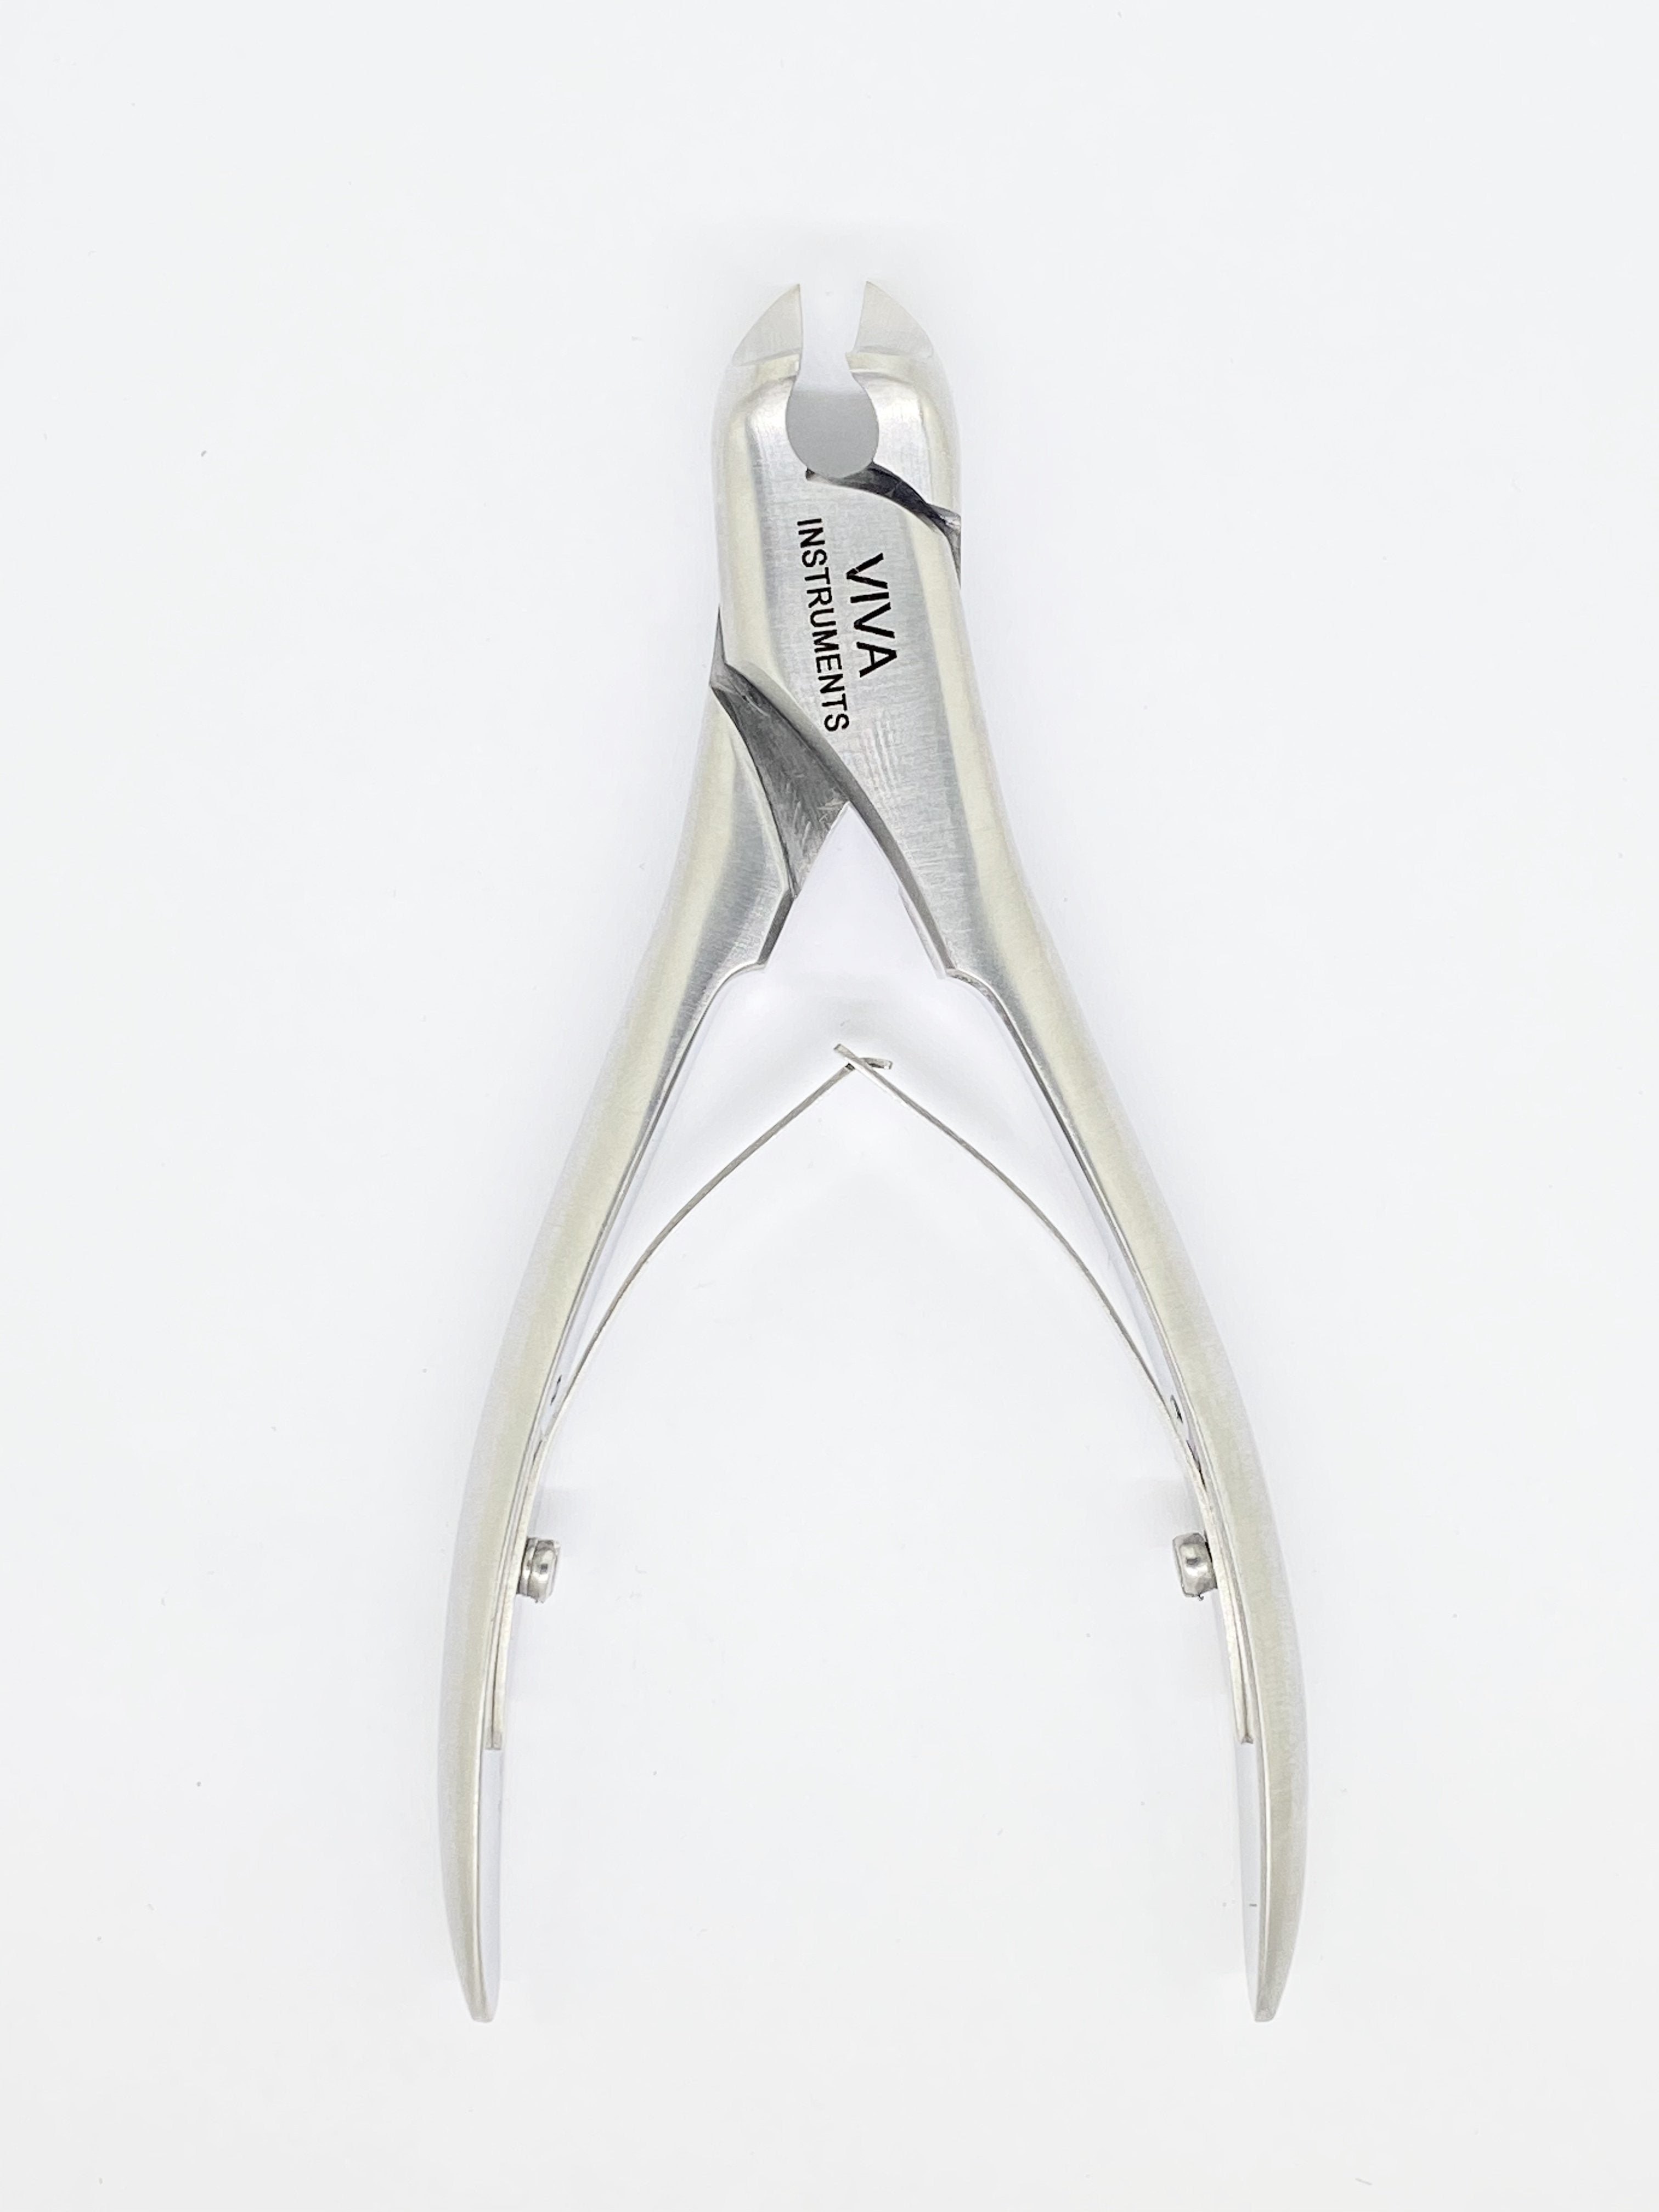 Nail clipper cutter podiatry instruments 